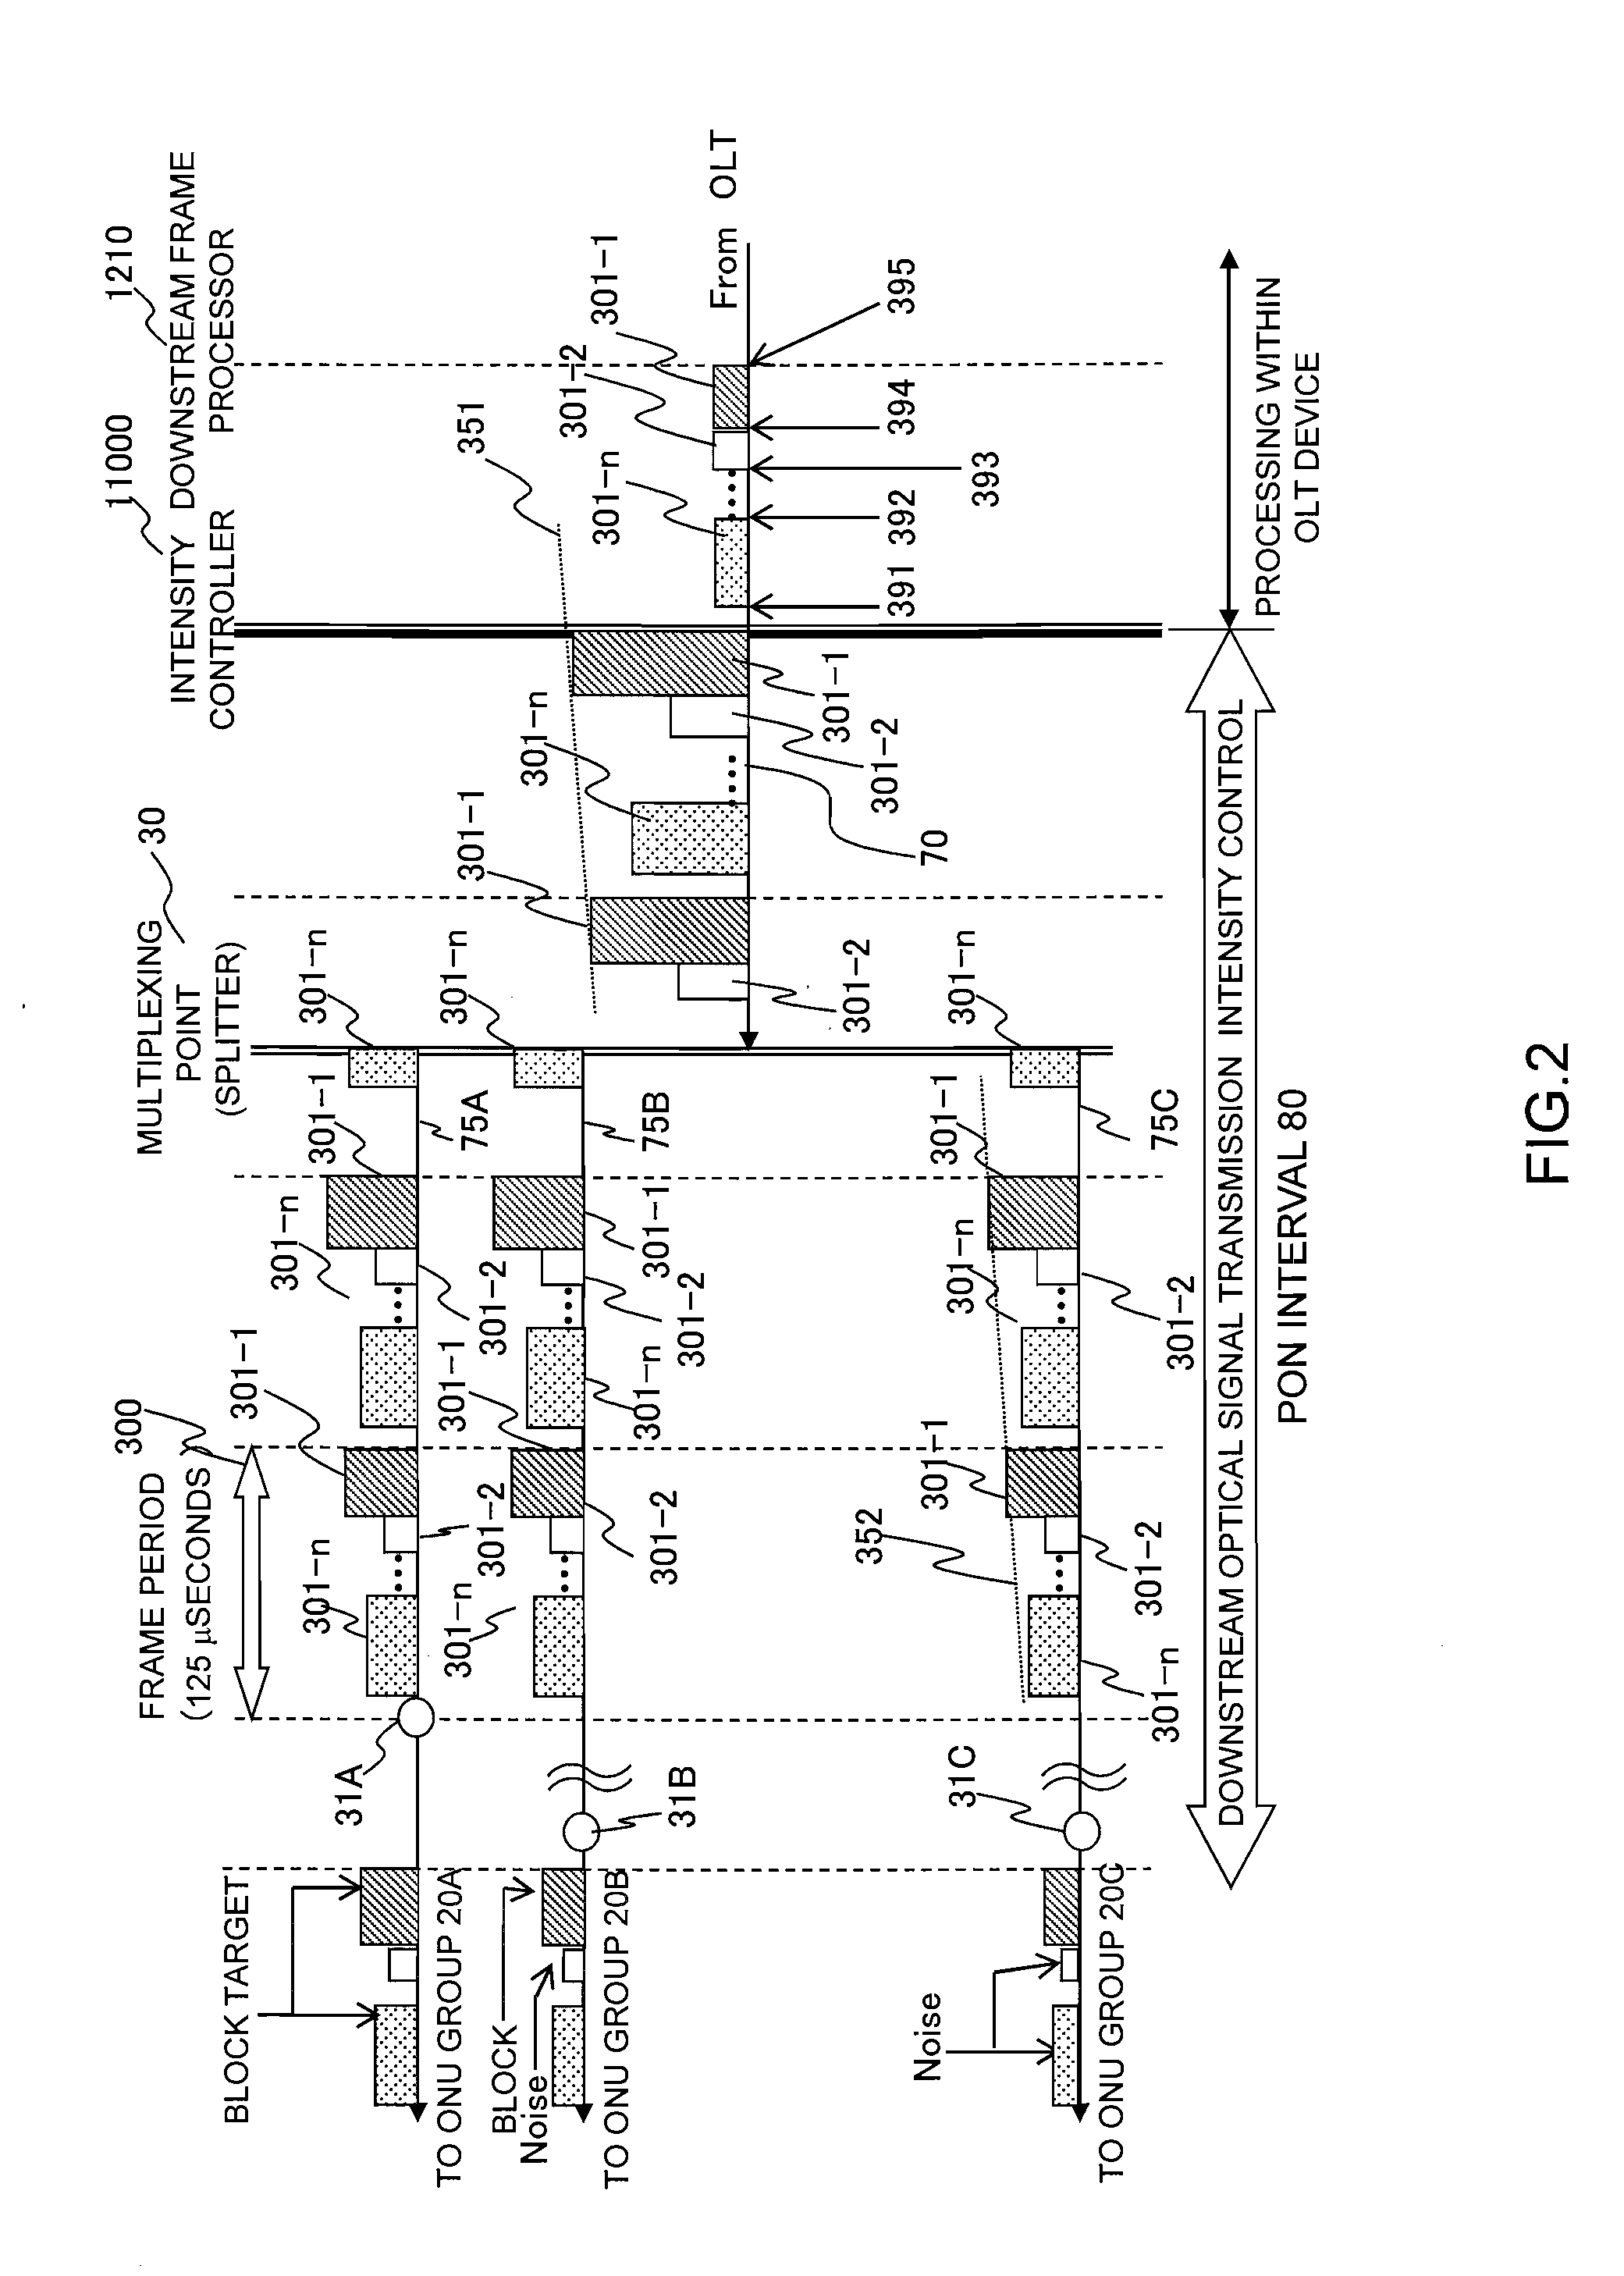 Passive optical network system